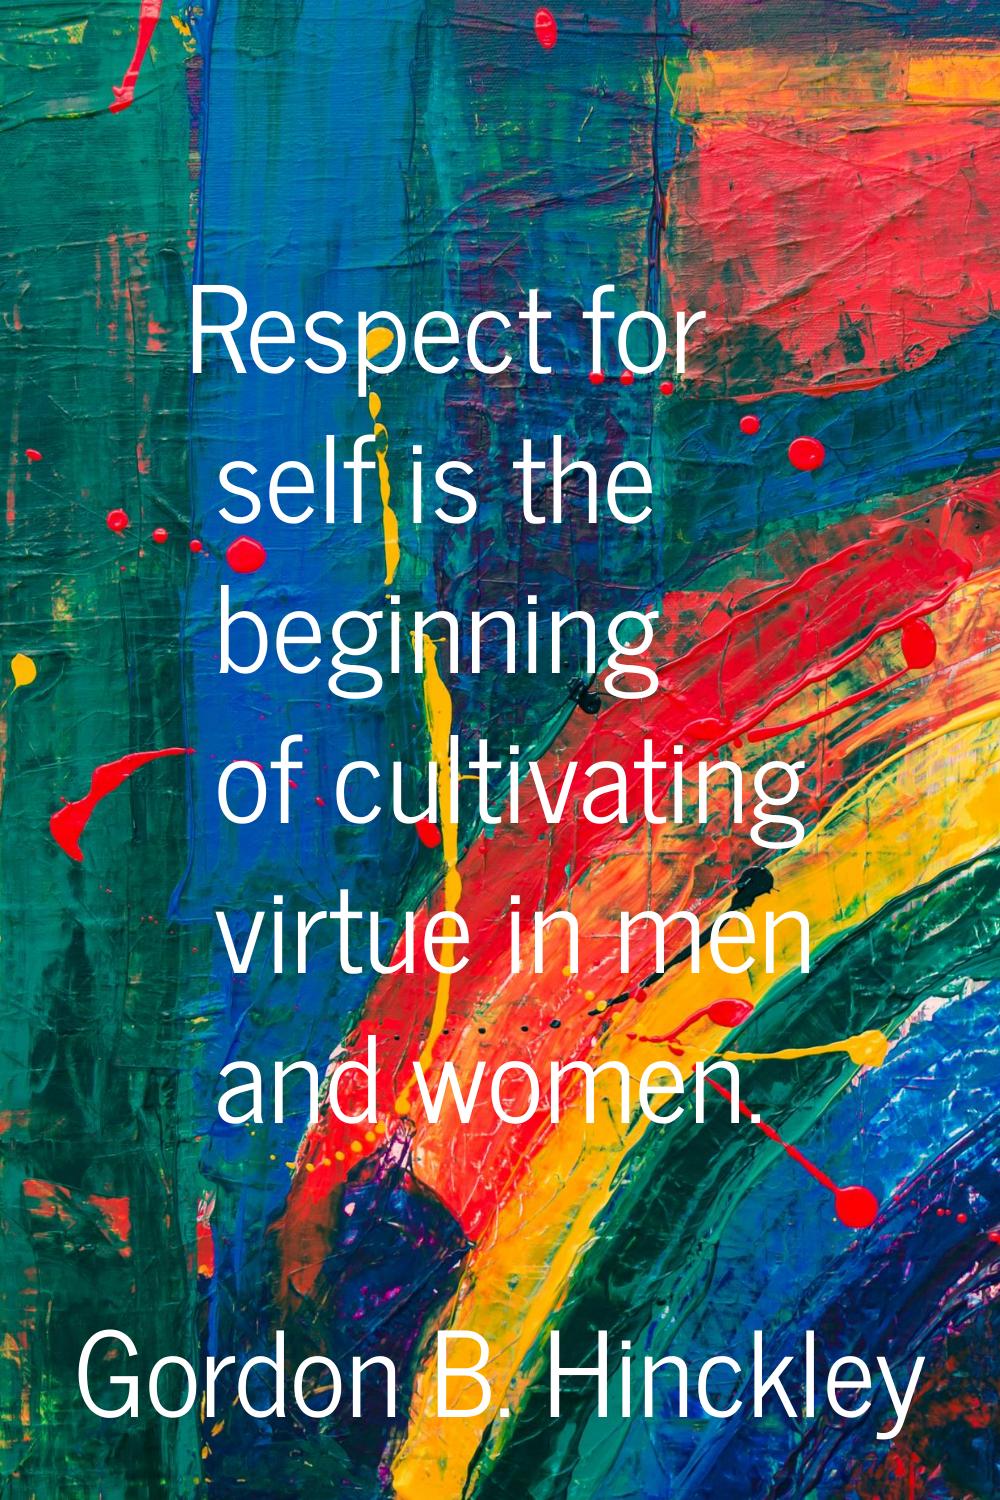 Respect for self is the beginning of cultivating virtue in men and women.